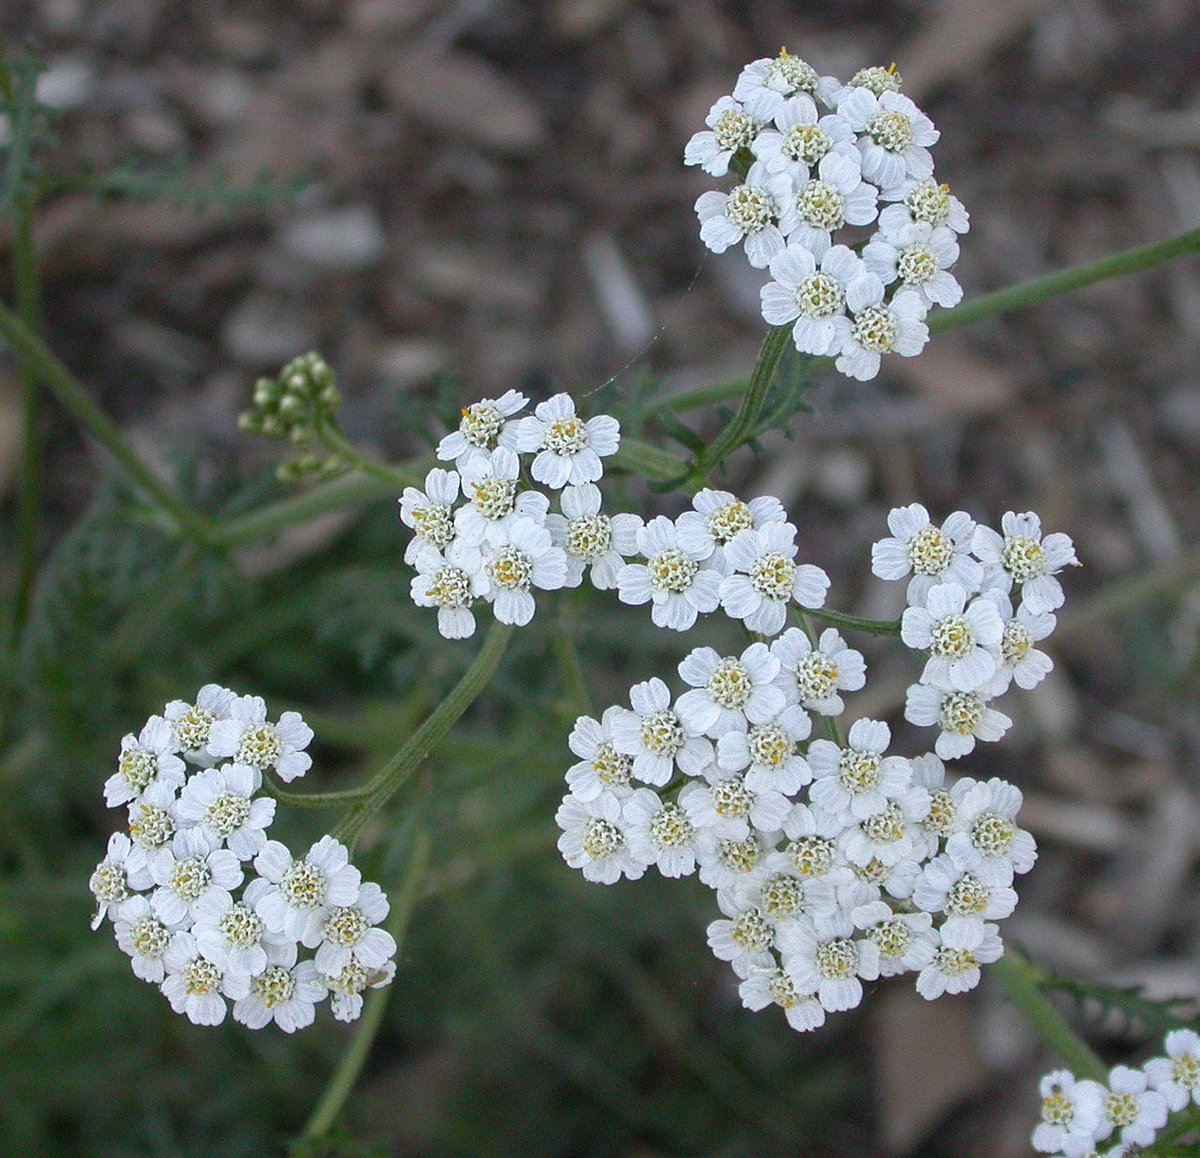 ~Moleyarrow~Achillea millefolium, commonly known as common yarrow, is a flowering plant in the family Asteraceae. It is native to temperate regions of the Northern Hemisphere in Asia and Europe and North America. It has seen historical use in traditional medicine.